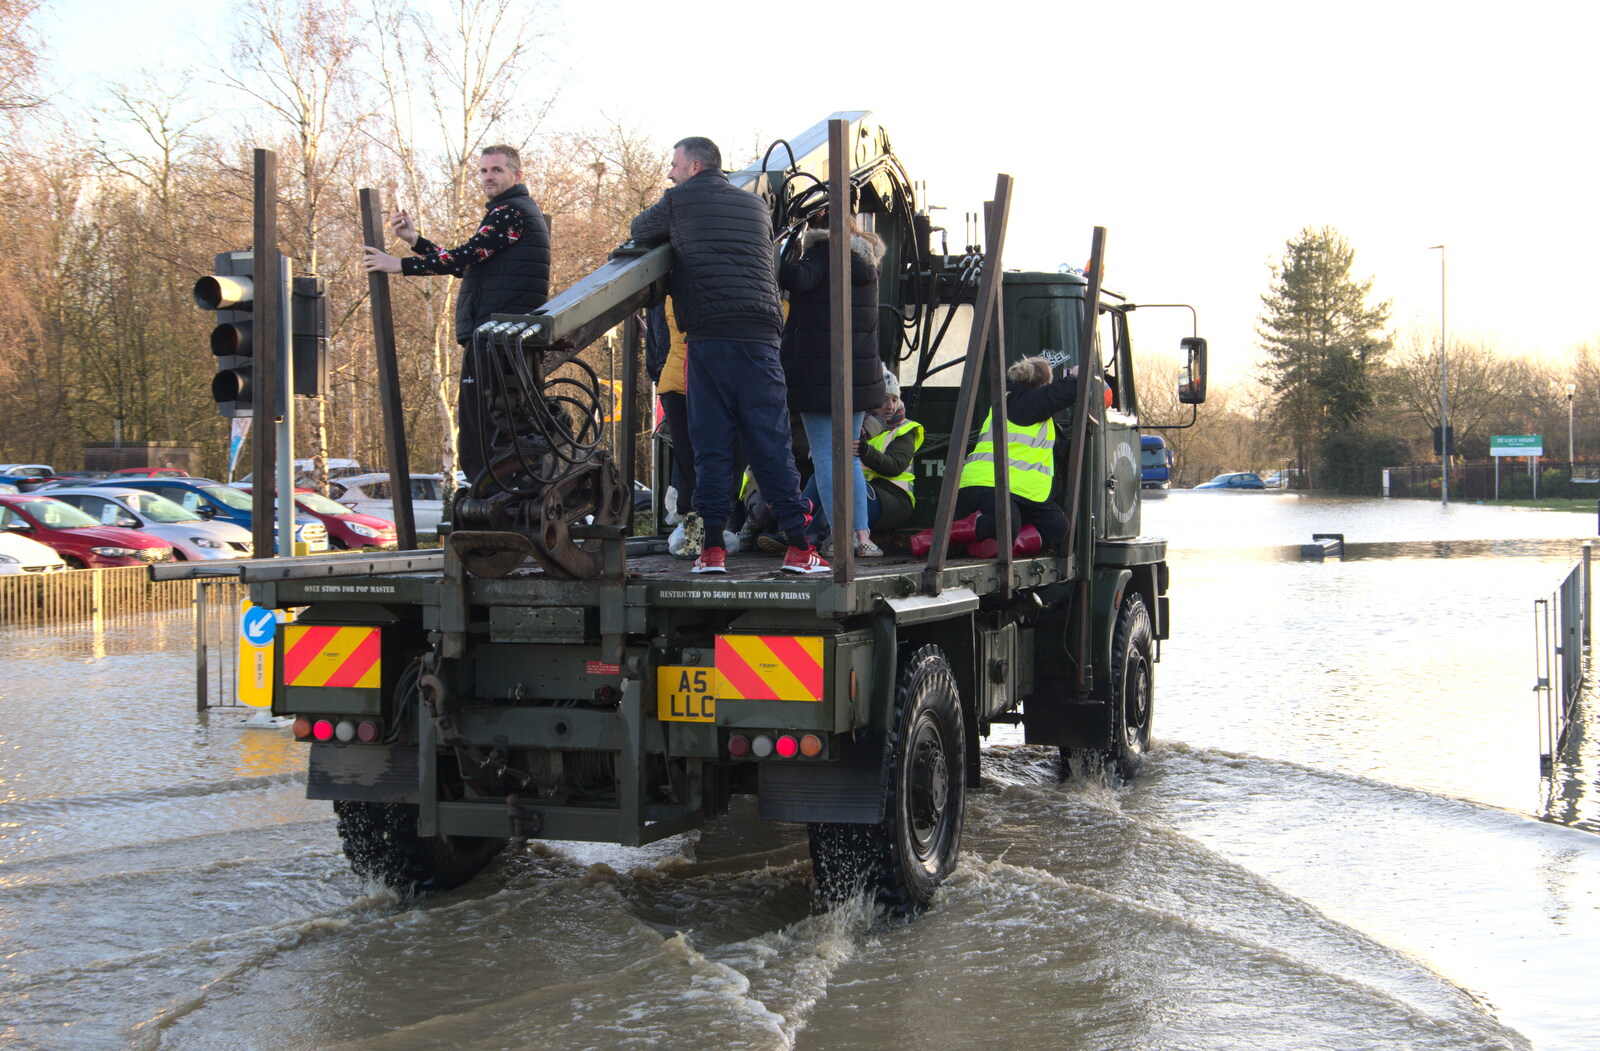 The staff get a lift to the care home from The Christmas Eve Floods, Diss, Norfolk - 24th December 2020